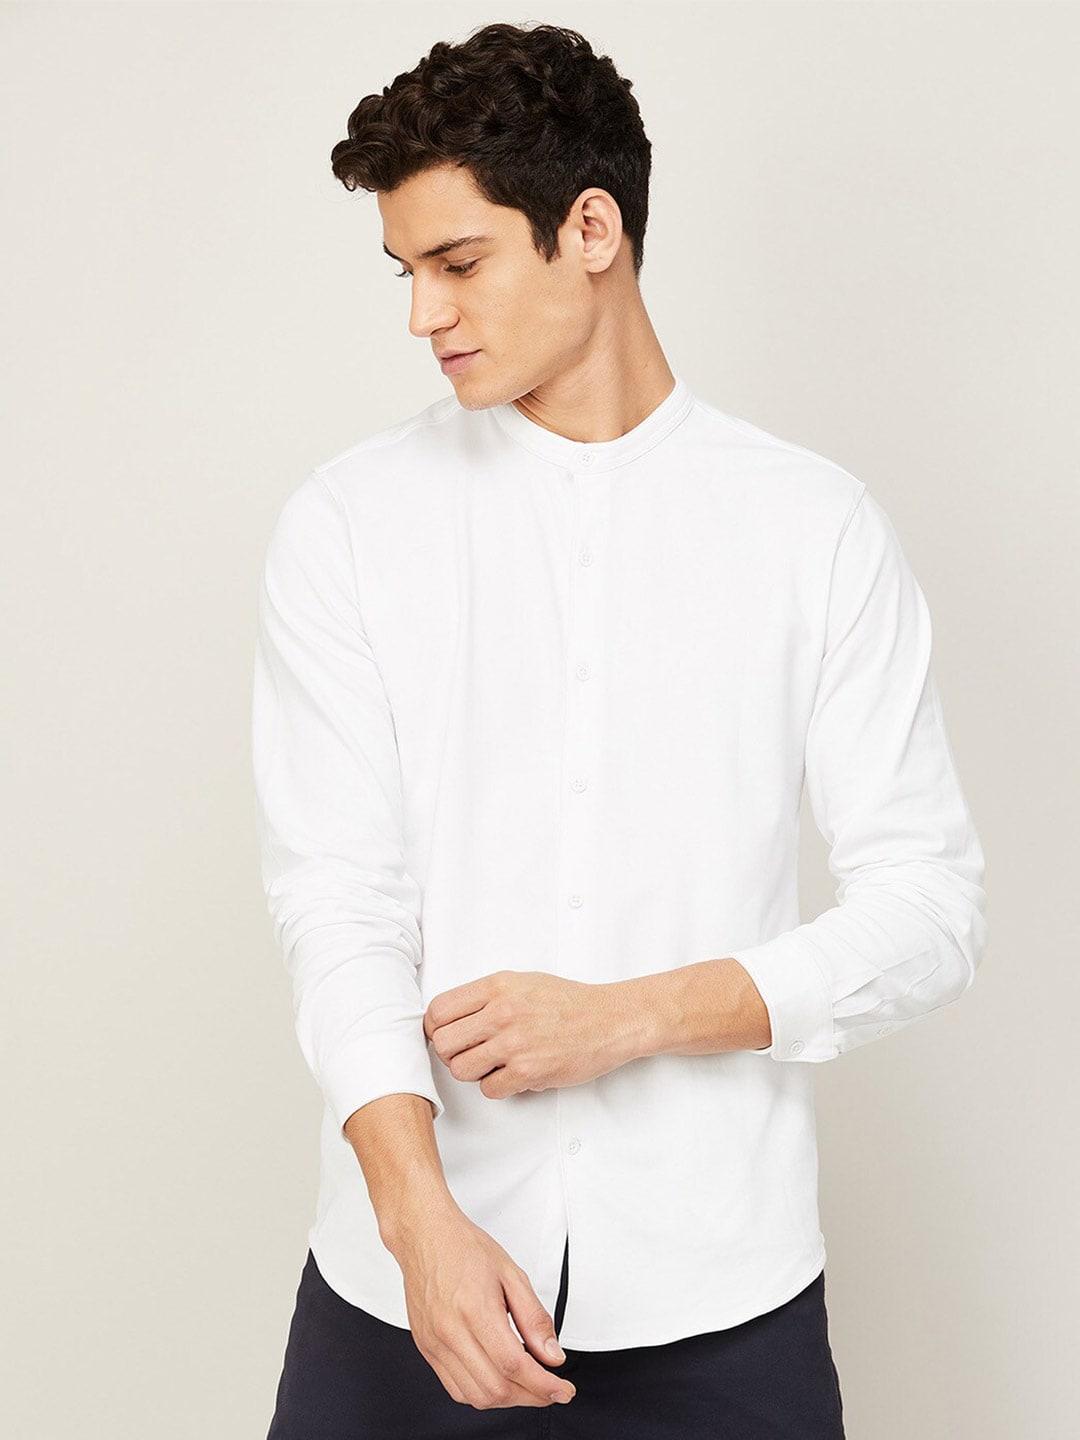 code by lifestyle men white casual shirt